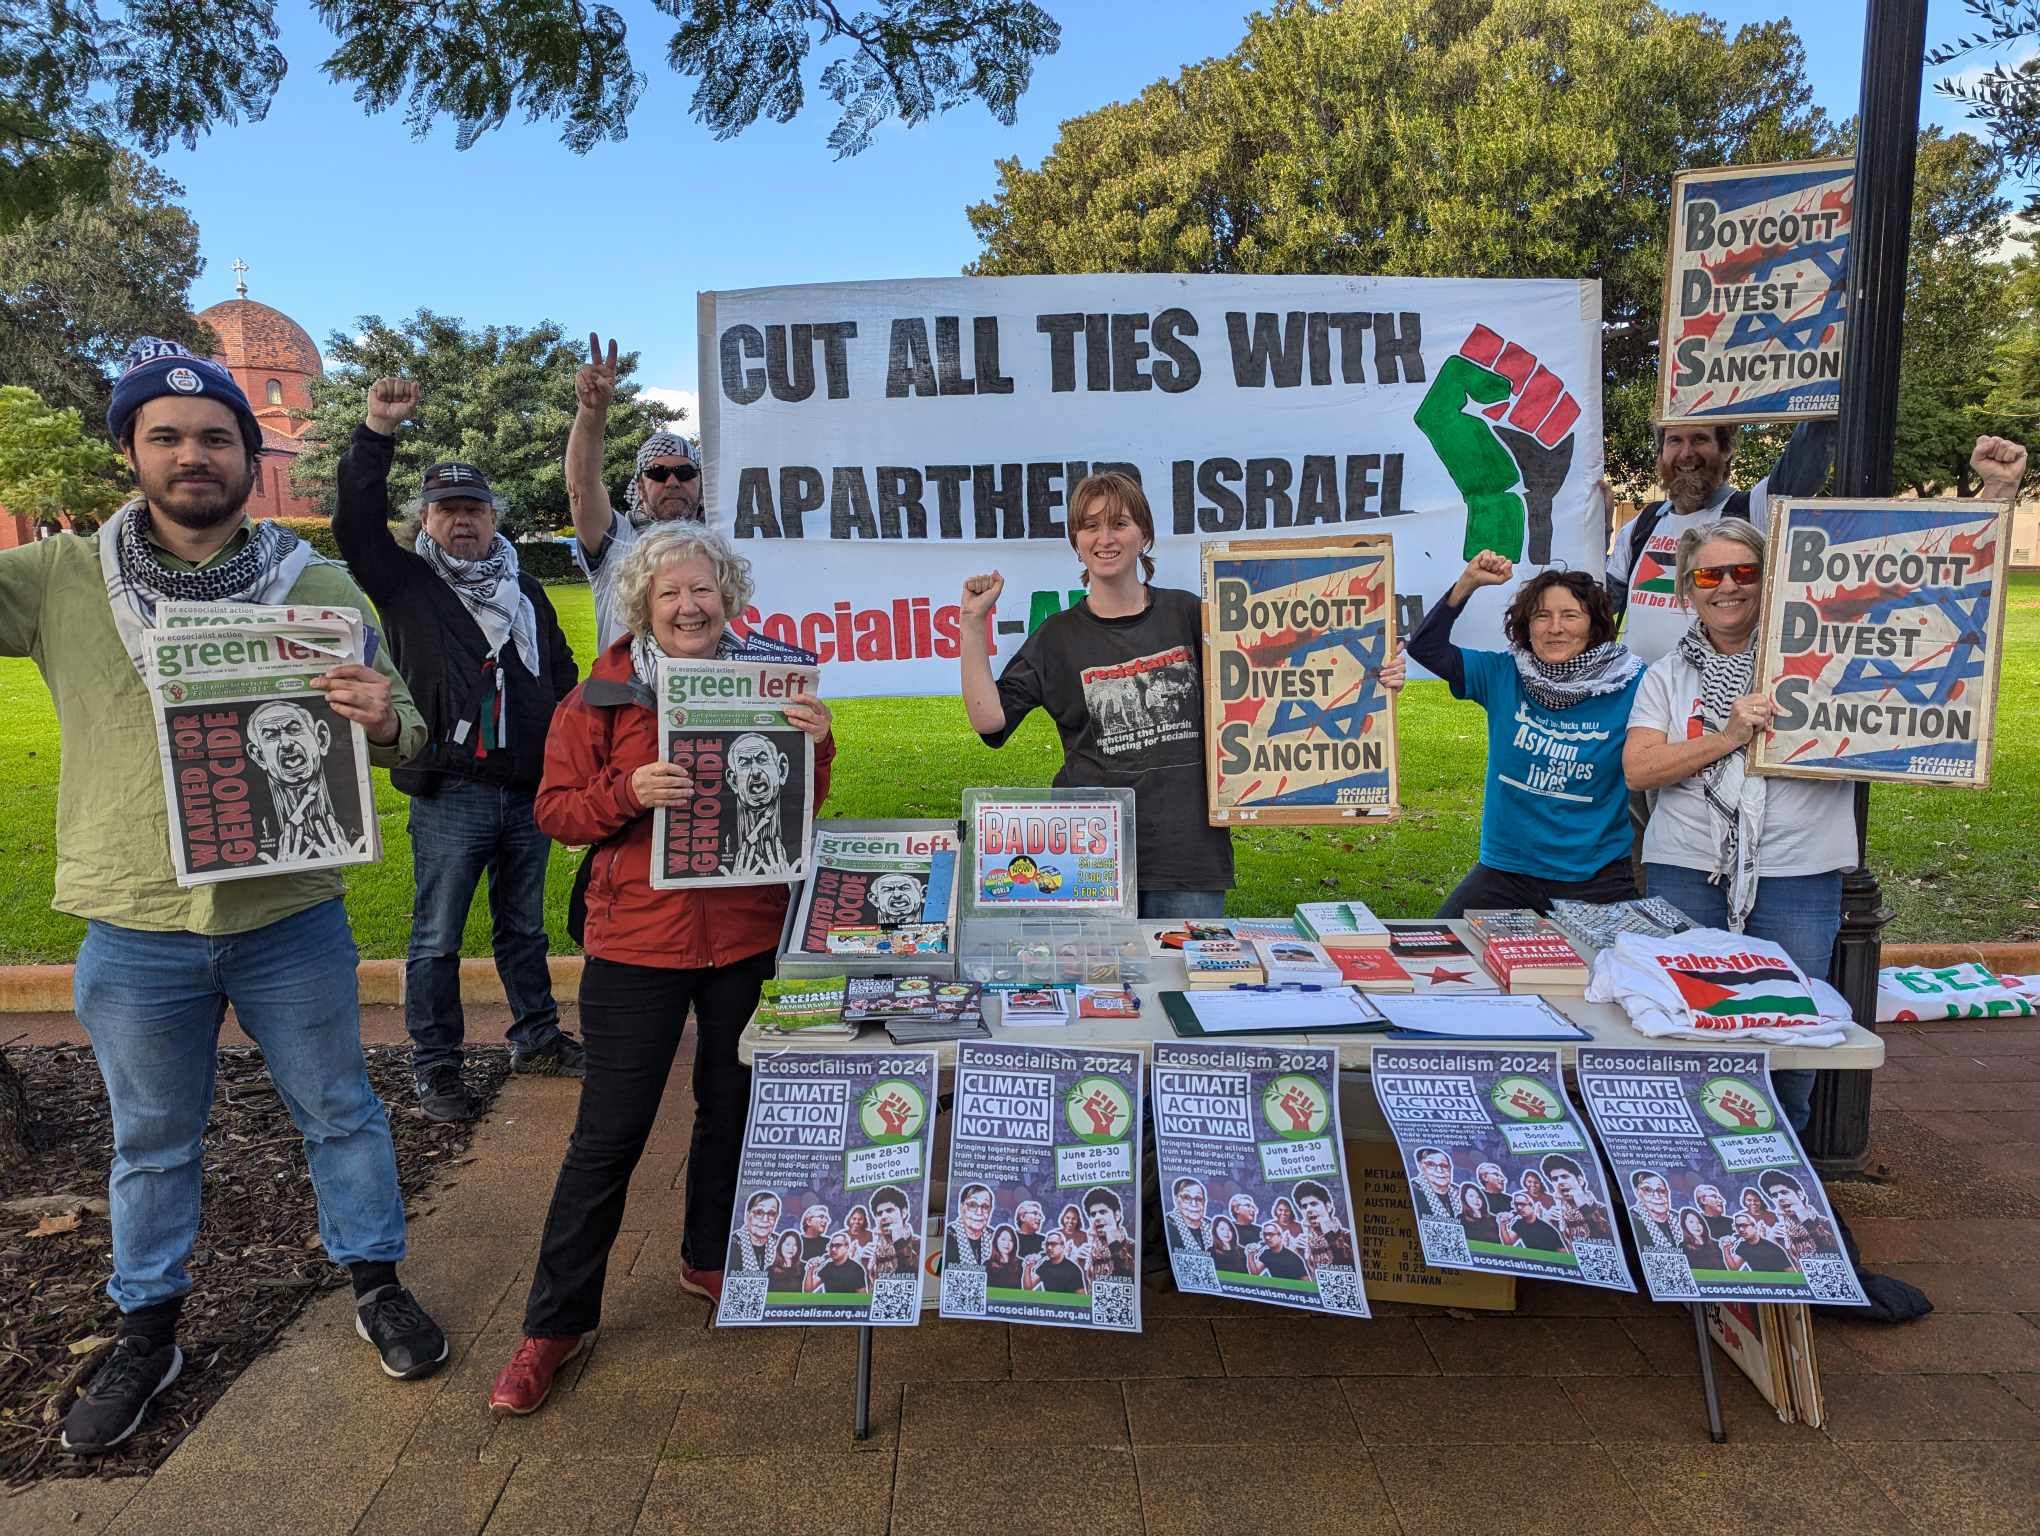 socialist alliance at perth protest